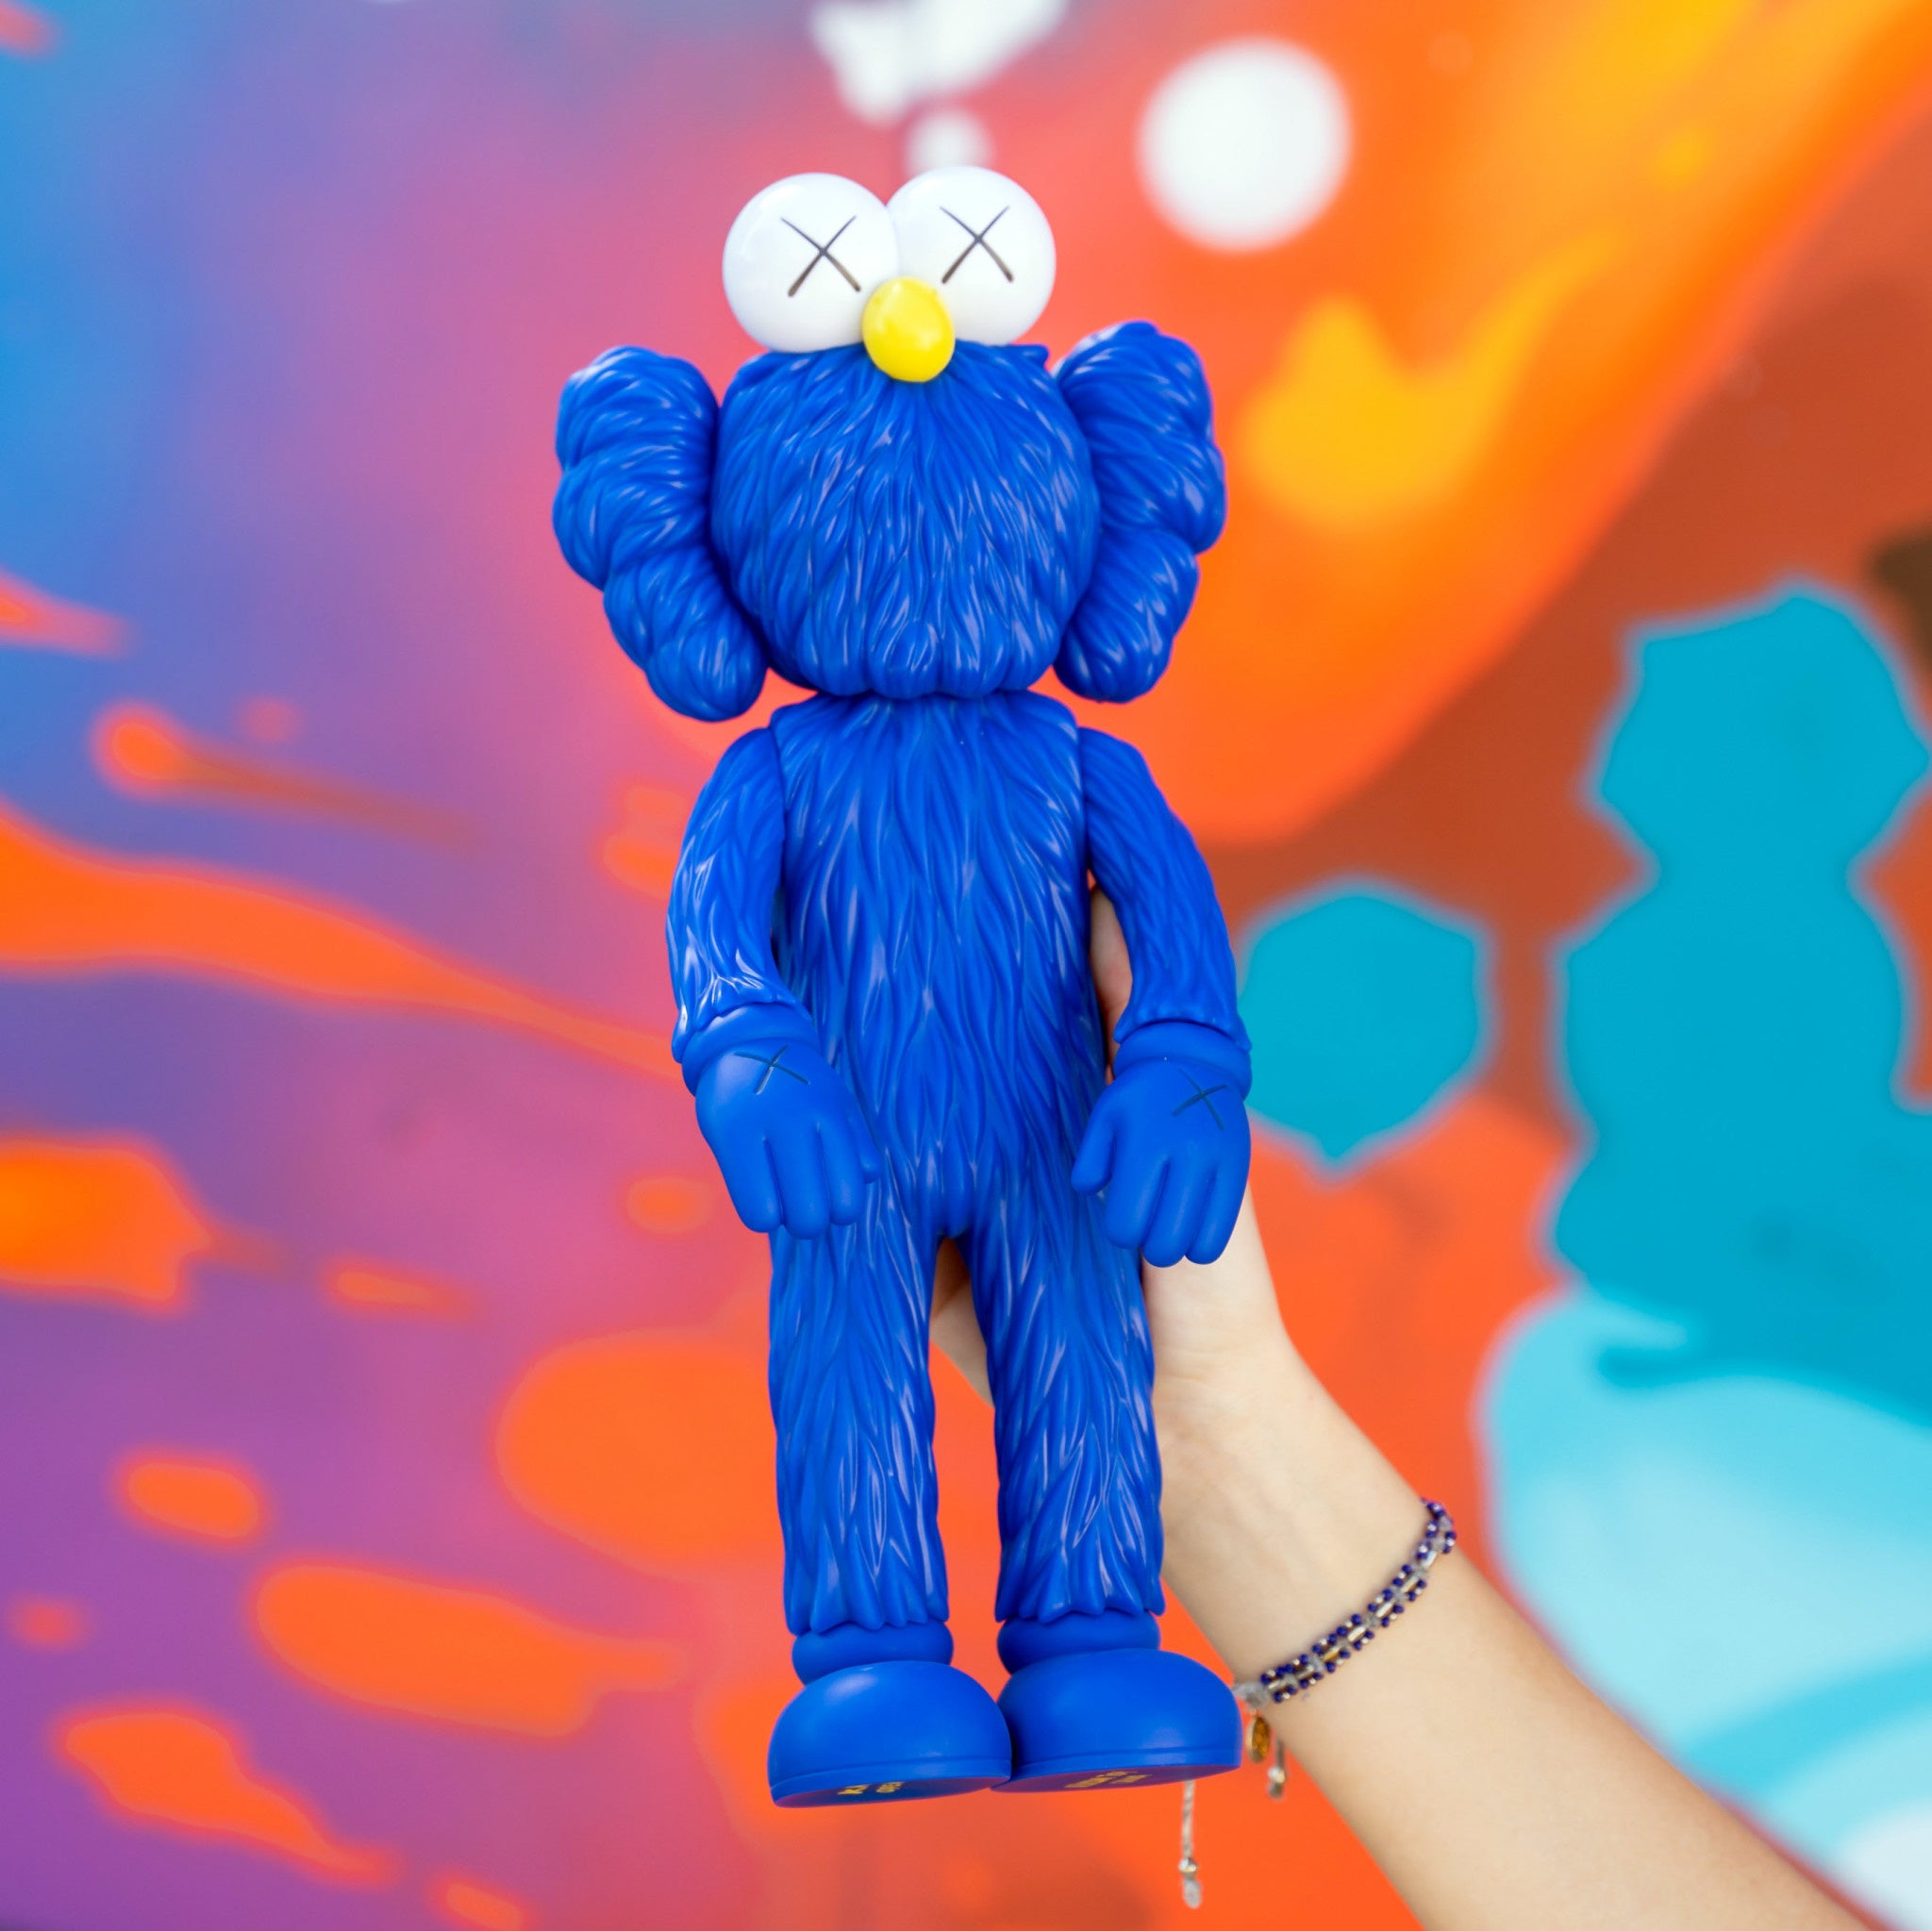 Invest in KAWS BFF Blue Vinyl Figure - 1 of 3 Exclusive Pieces